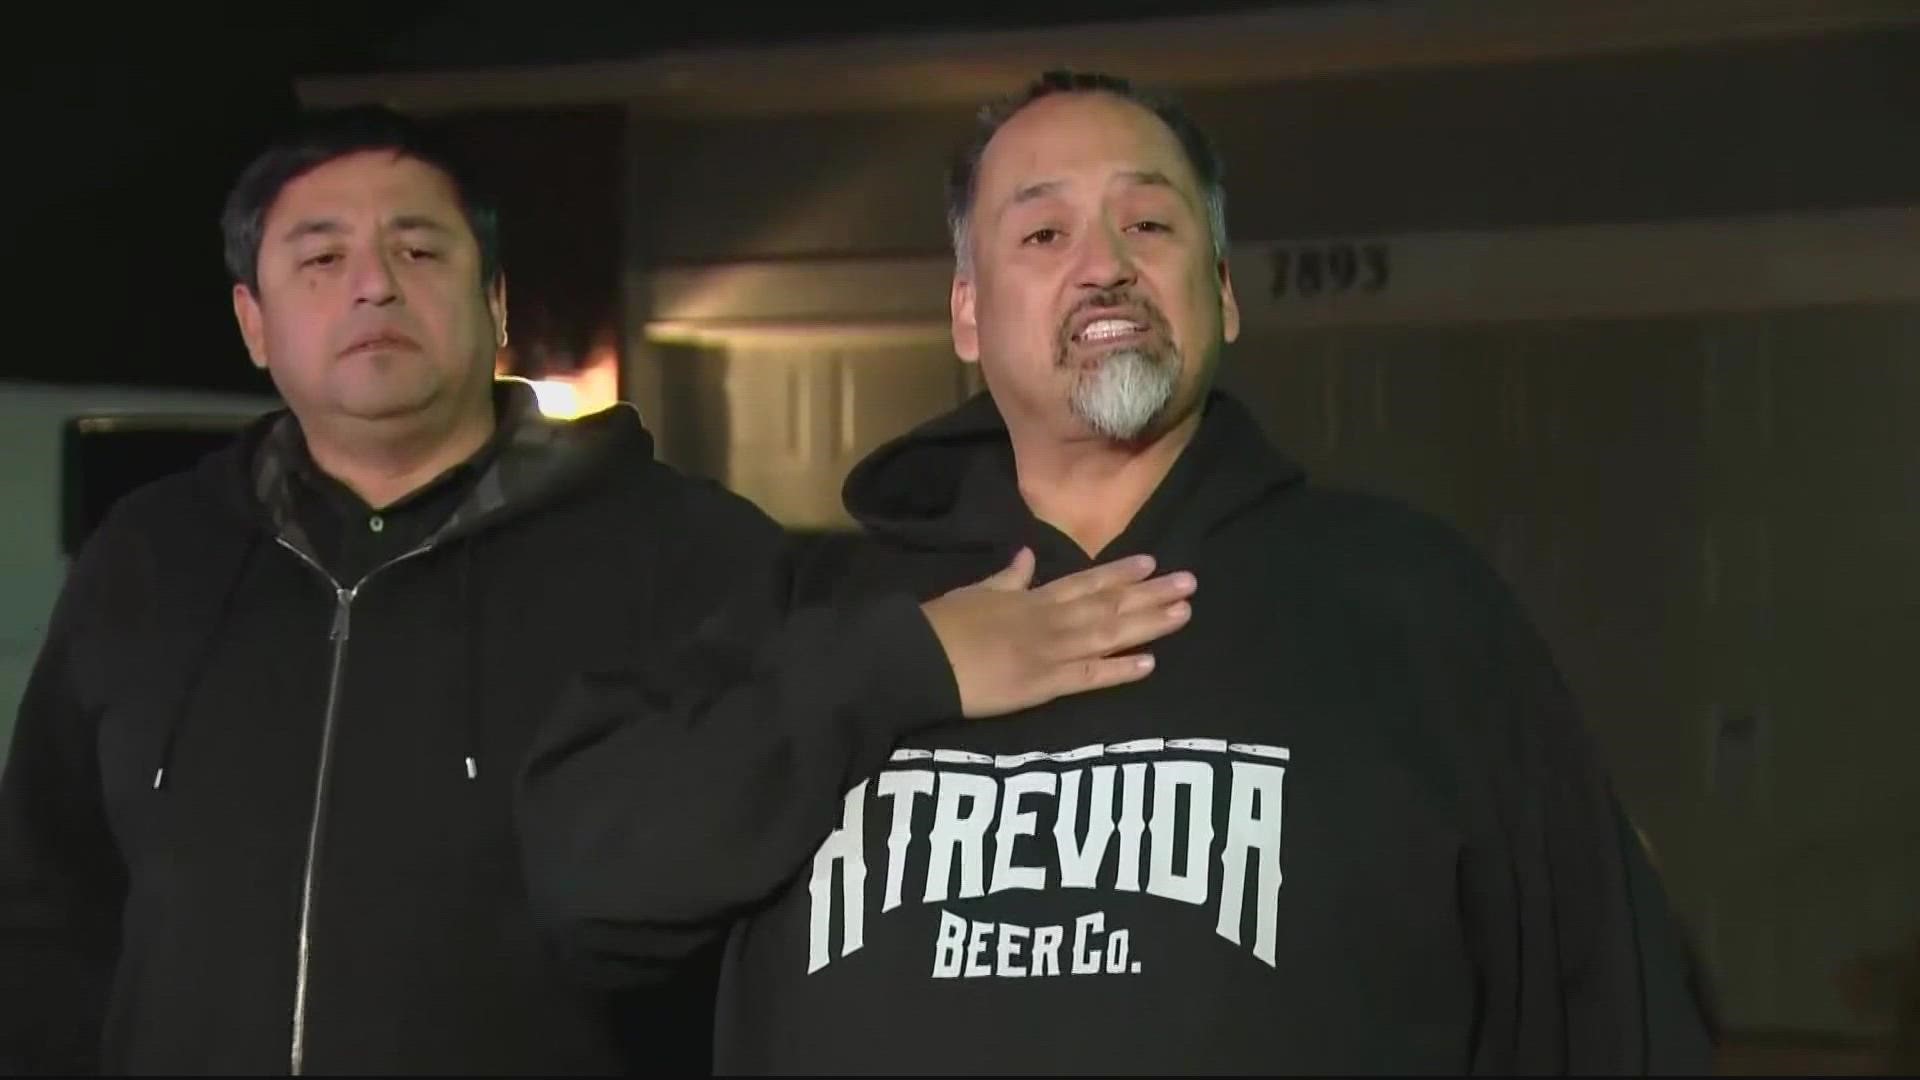 When army veteran Rich Fierro realized a gunman was spraying bullets inside the club where he had gathered with friends and family, instincts from his military train